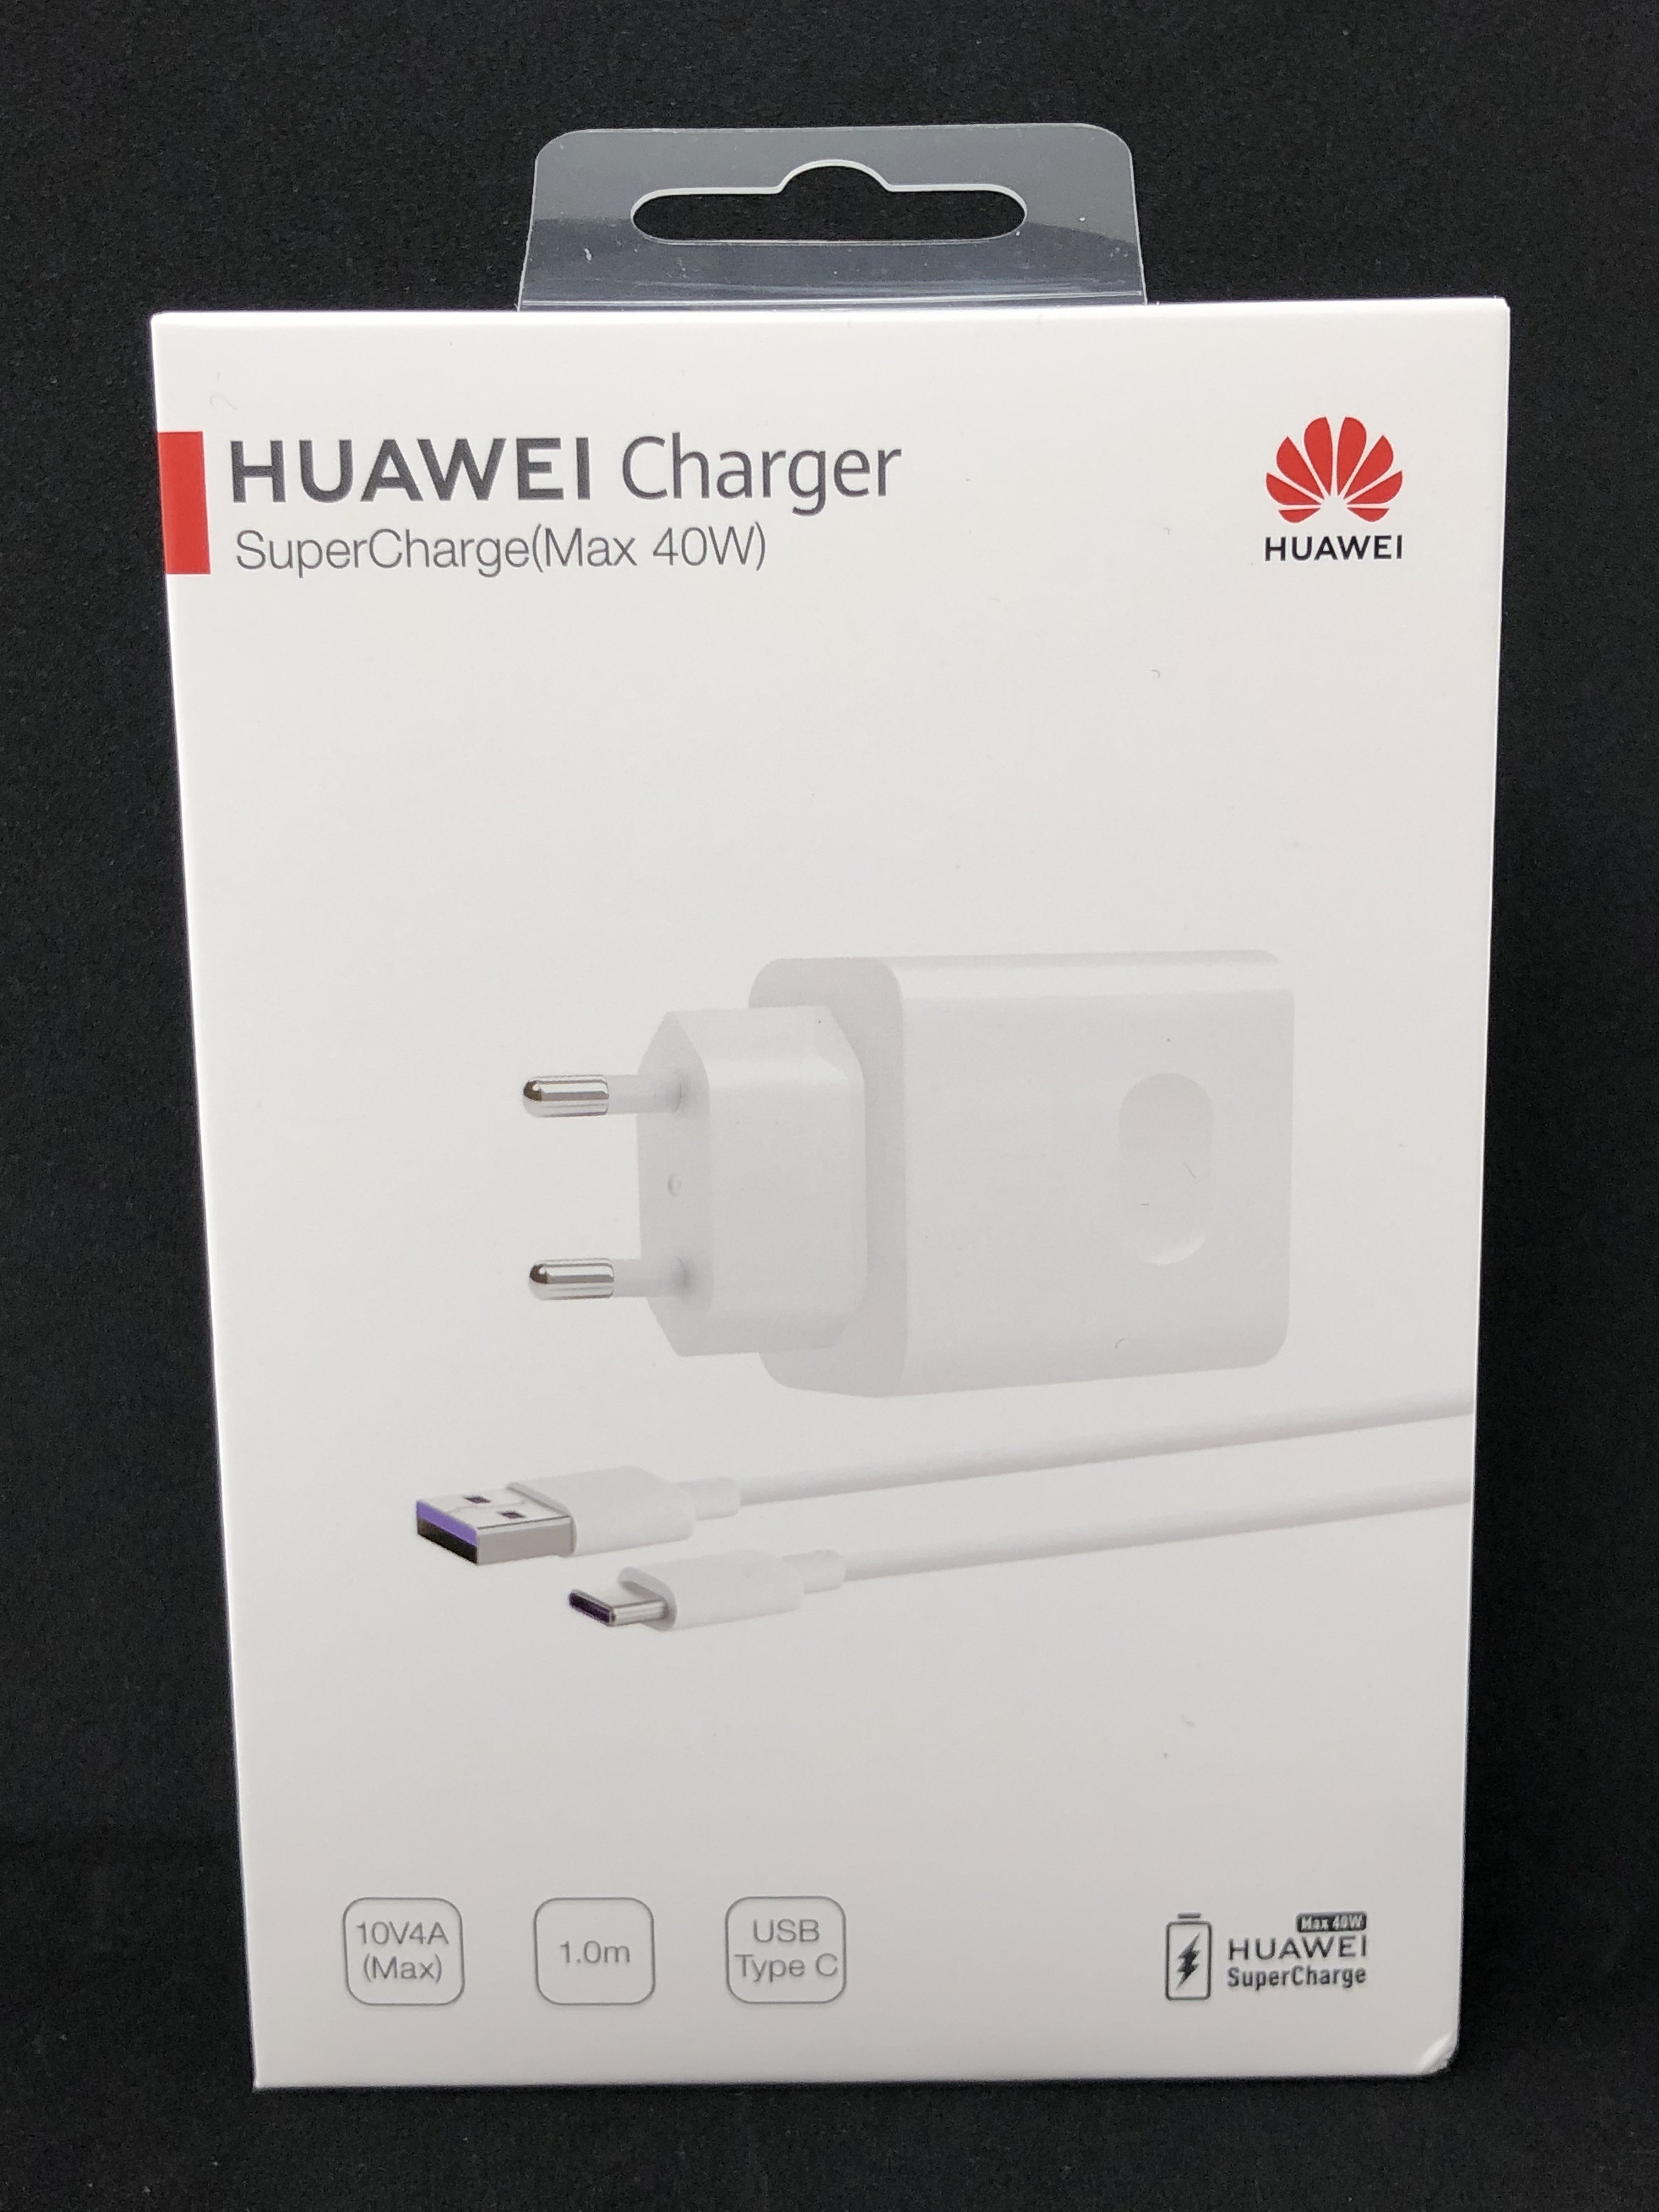 Chargeur secteur Huawei P20 Lite smartphone - Blanc - France Chargeur